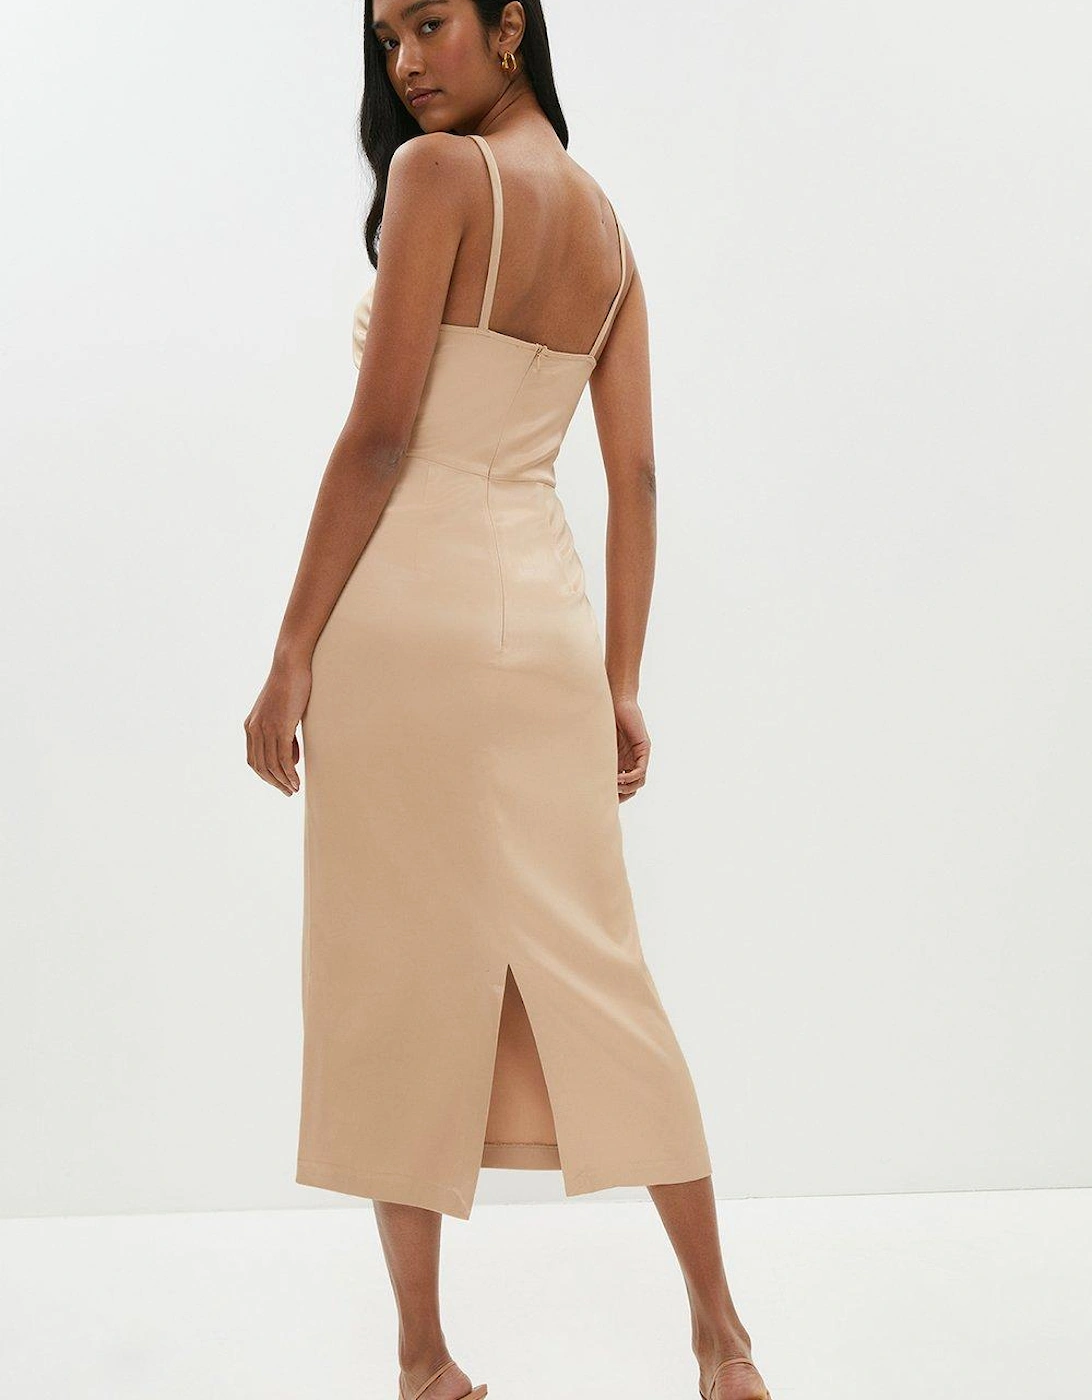 Ruched Keyhole Strappy Satin Dress